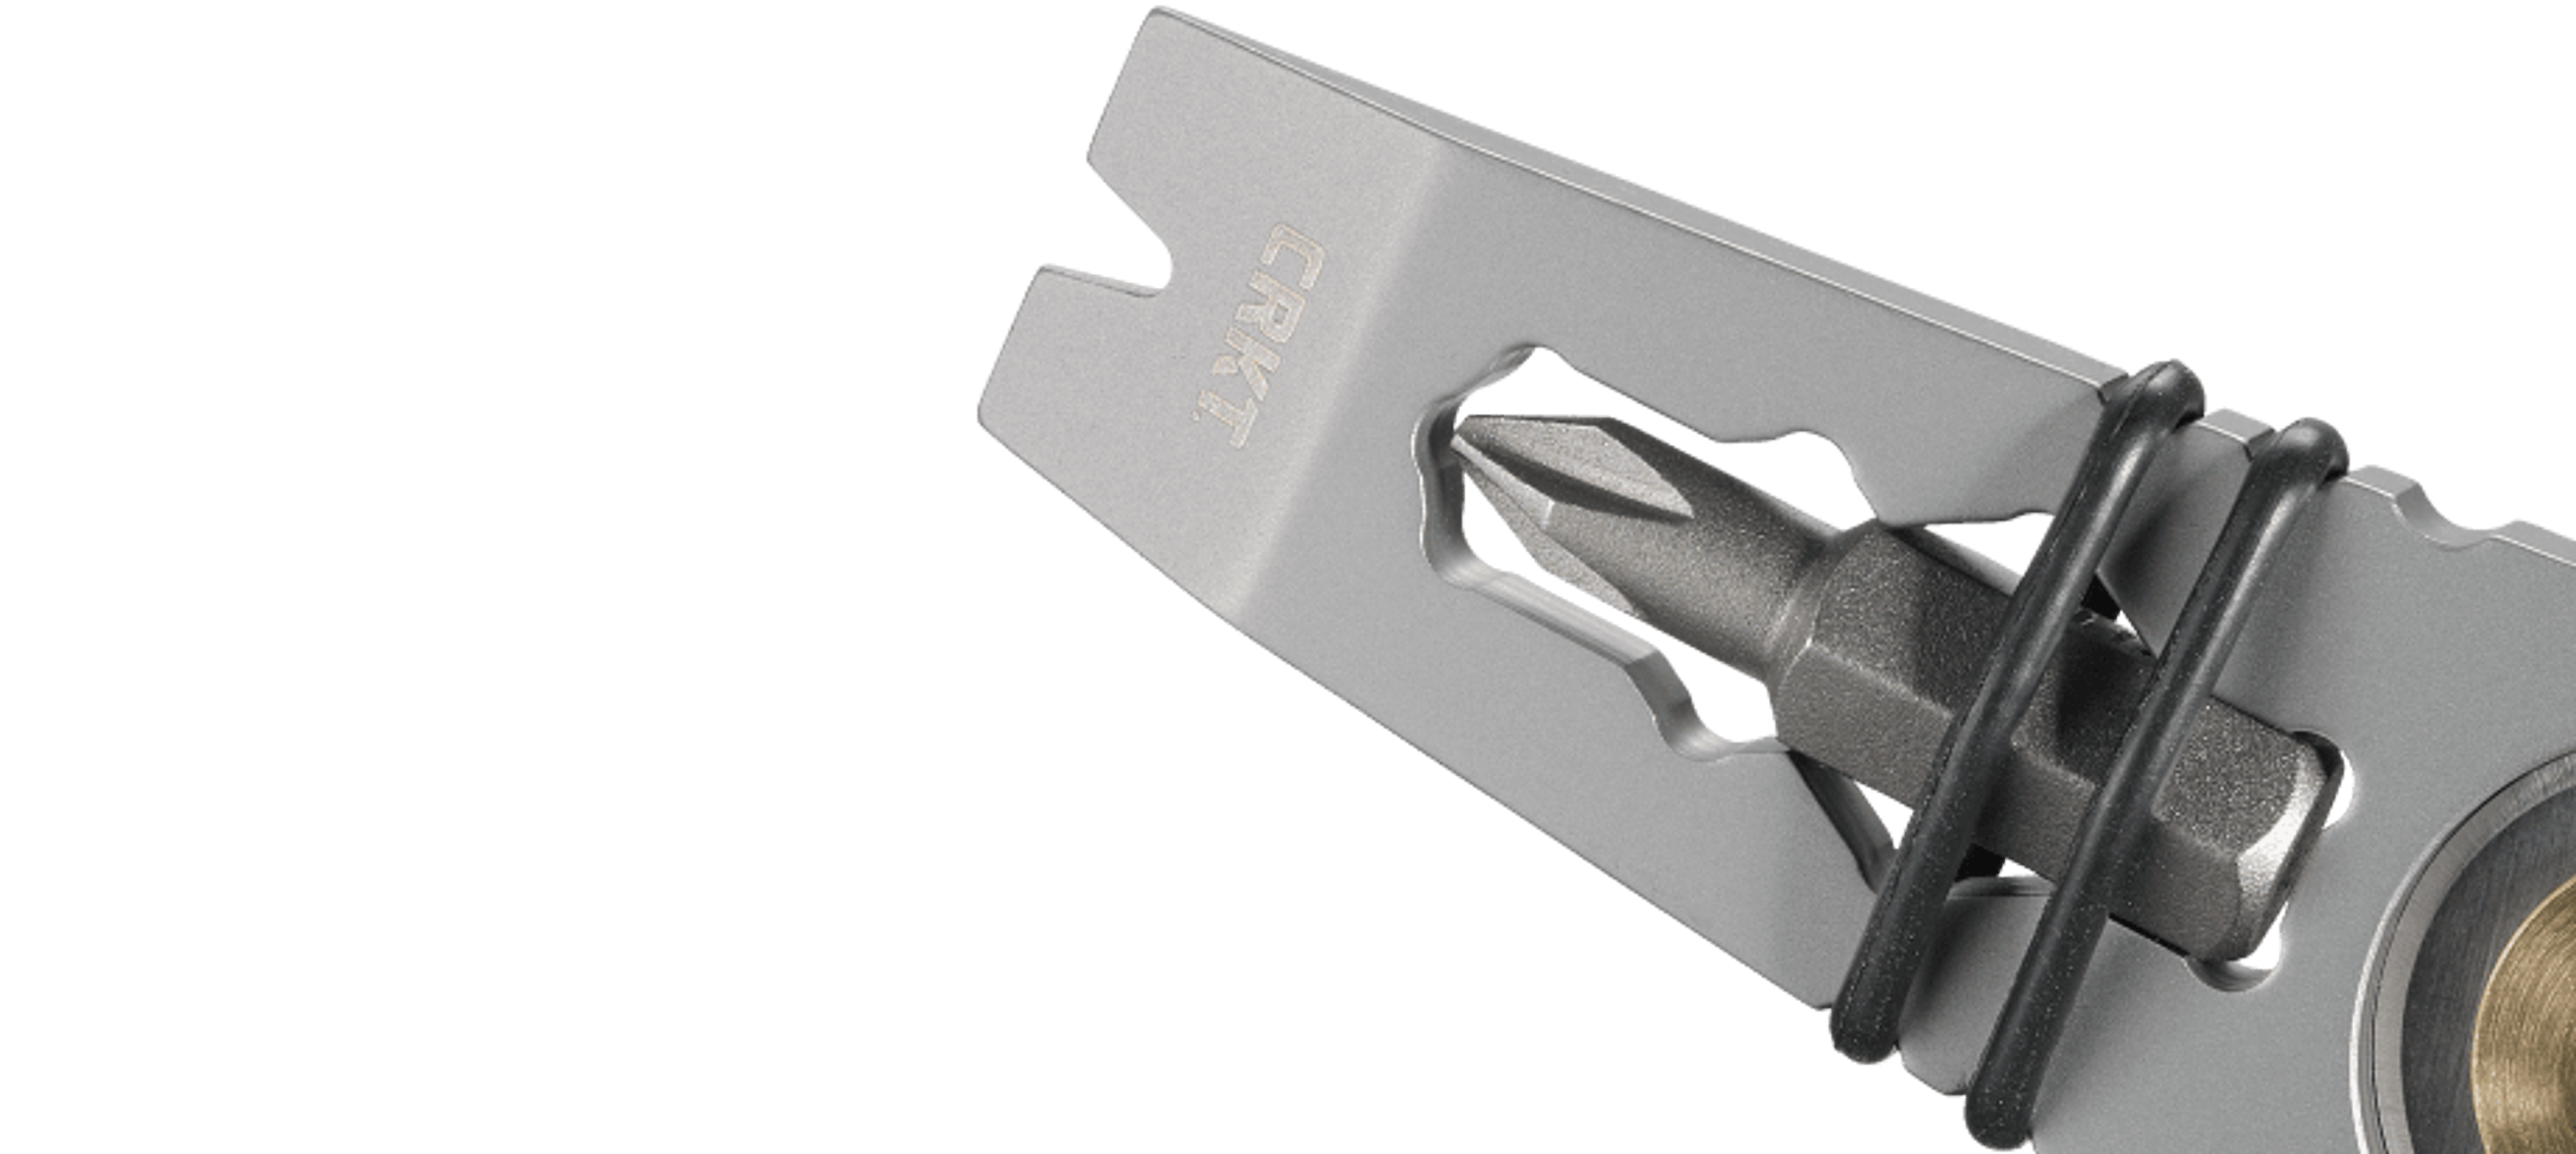 Pry Cutter Keychain Tool angled tip